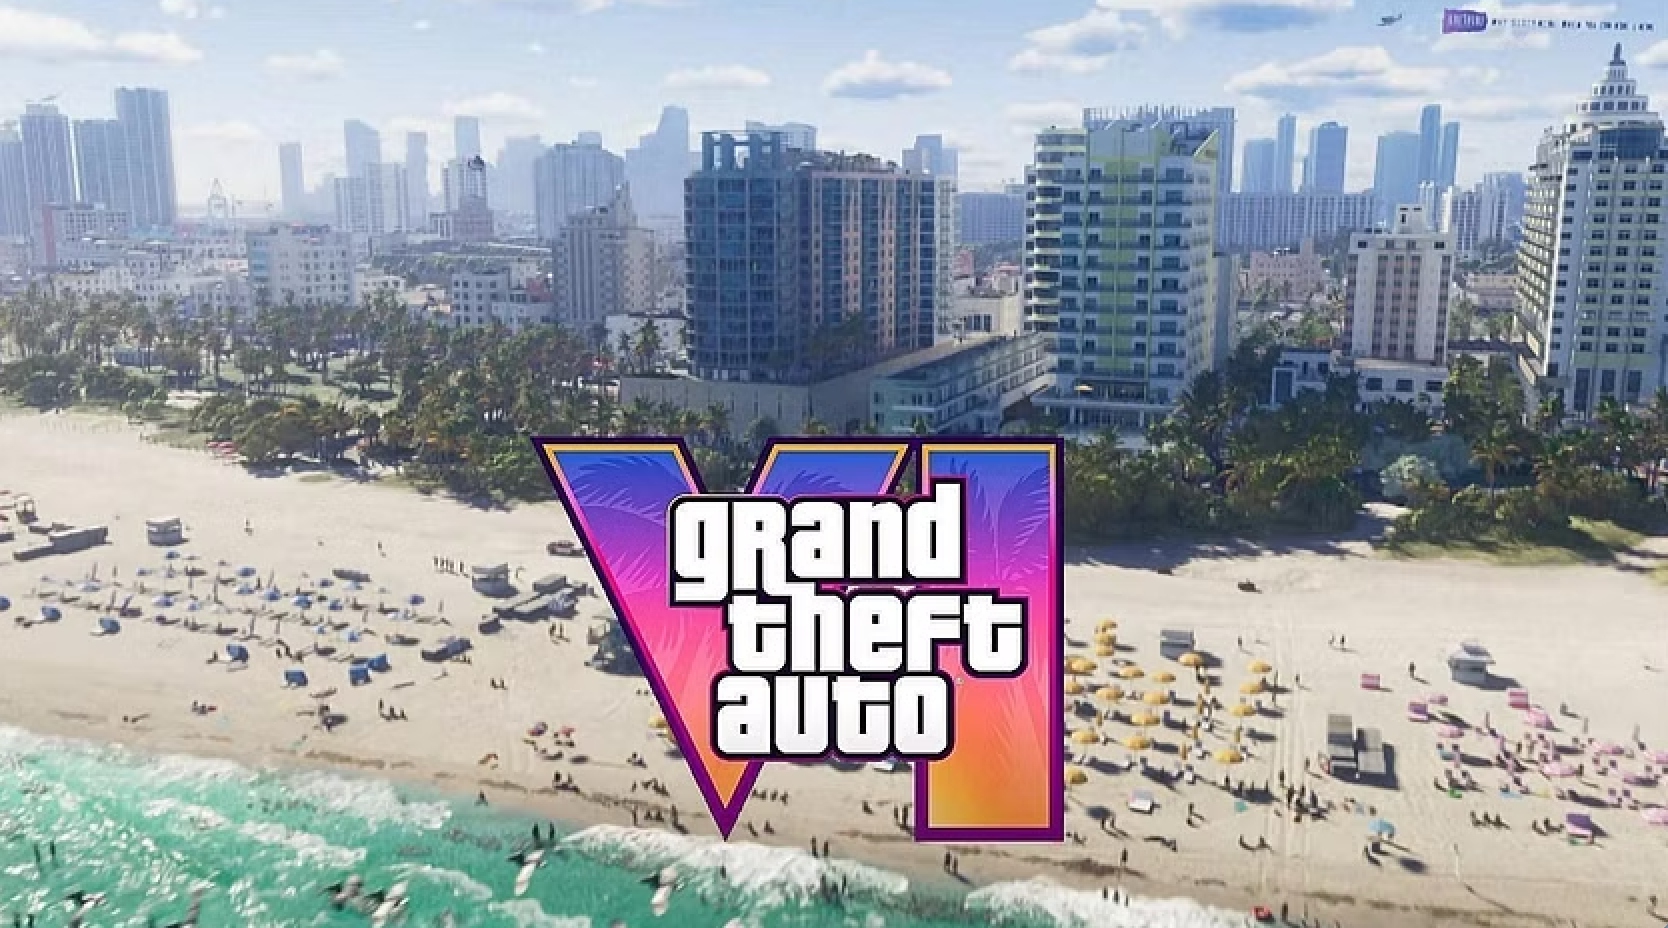 GTA VI Rumoured Release Date: Grand Theft Auto VI is of the Biggest Video Games of All Time